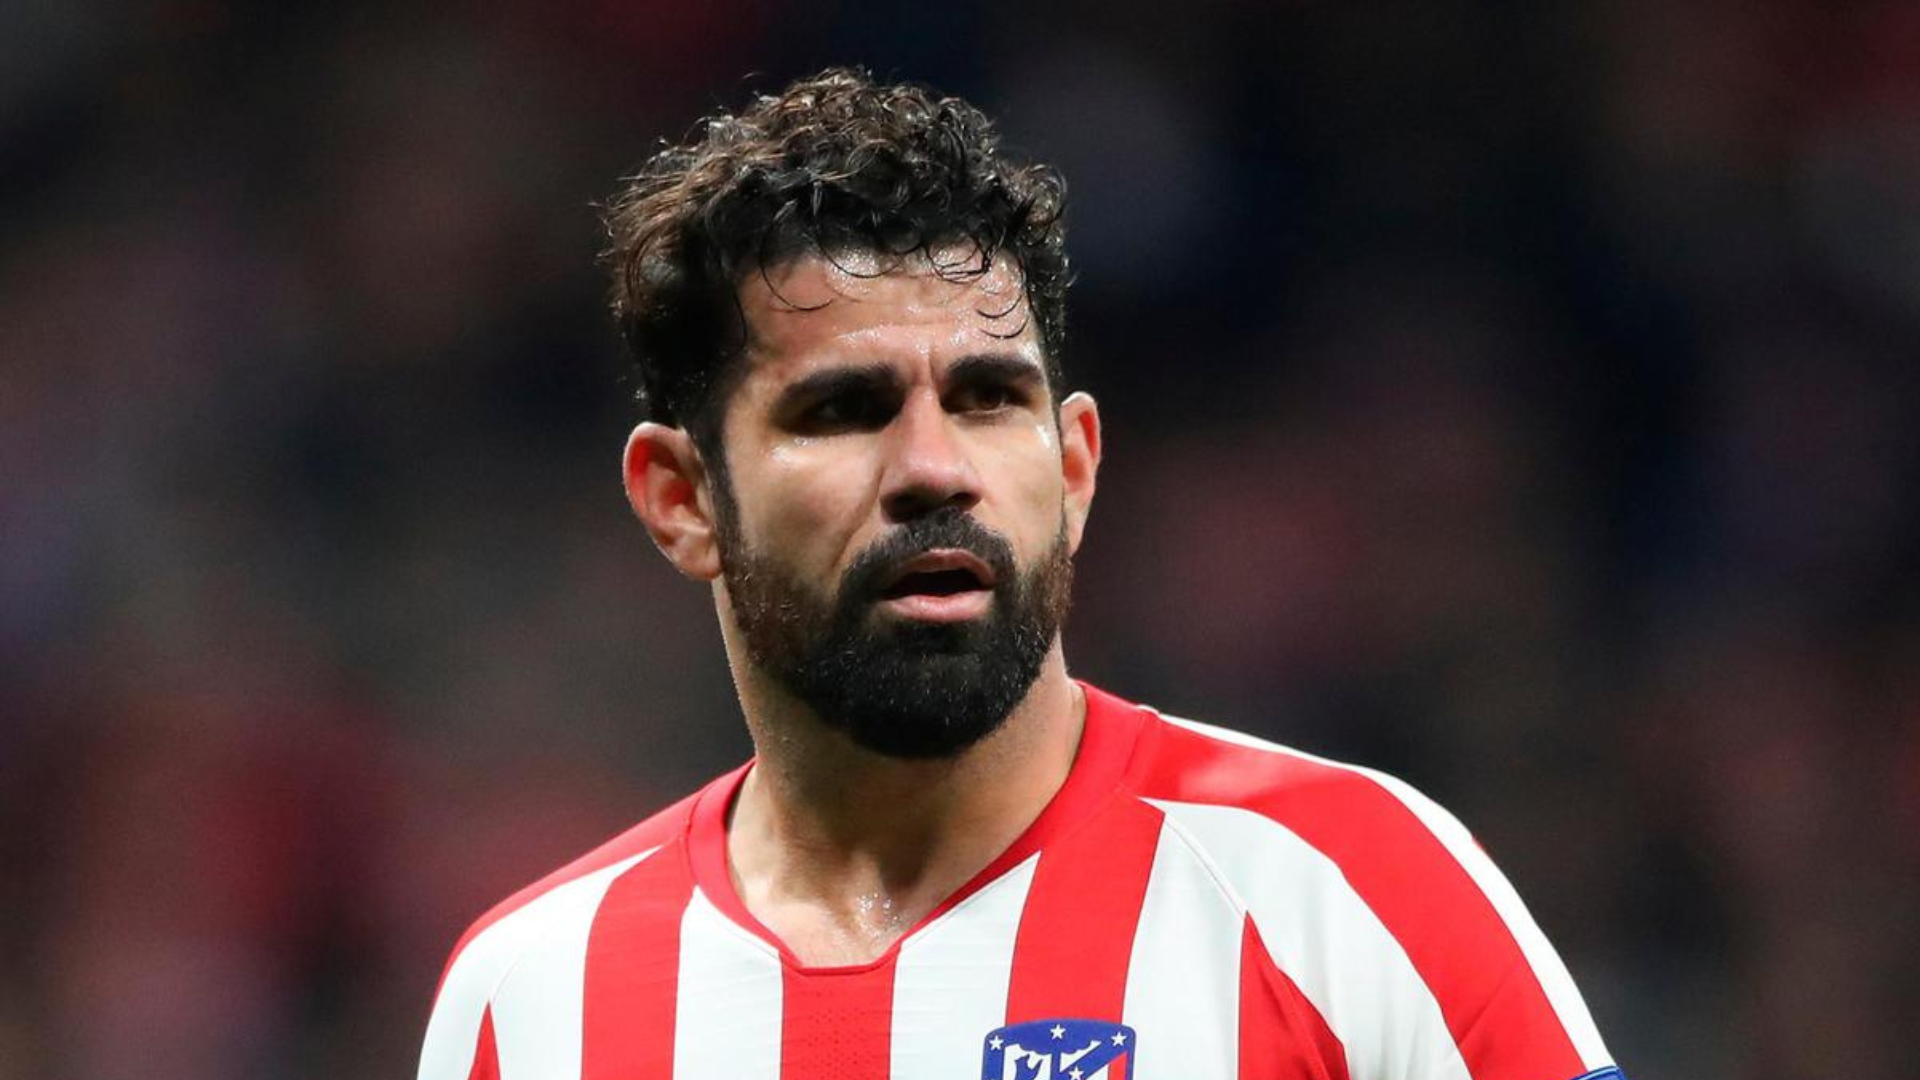 Diego Costa with beard and wearing red and white soccer uniform